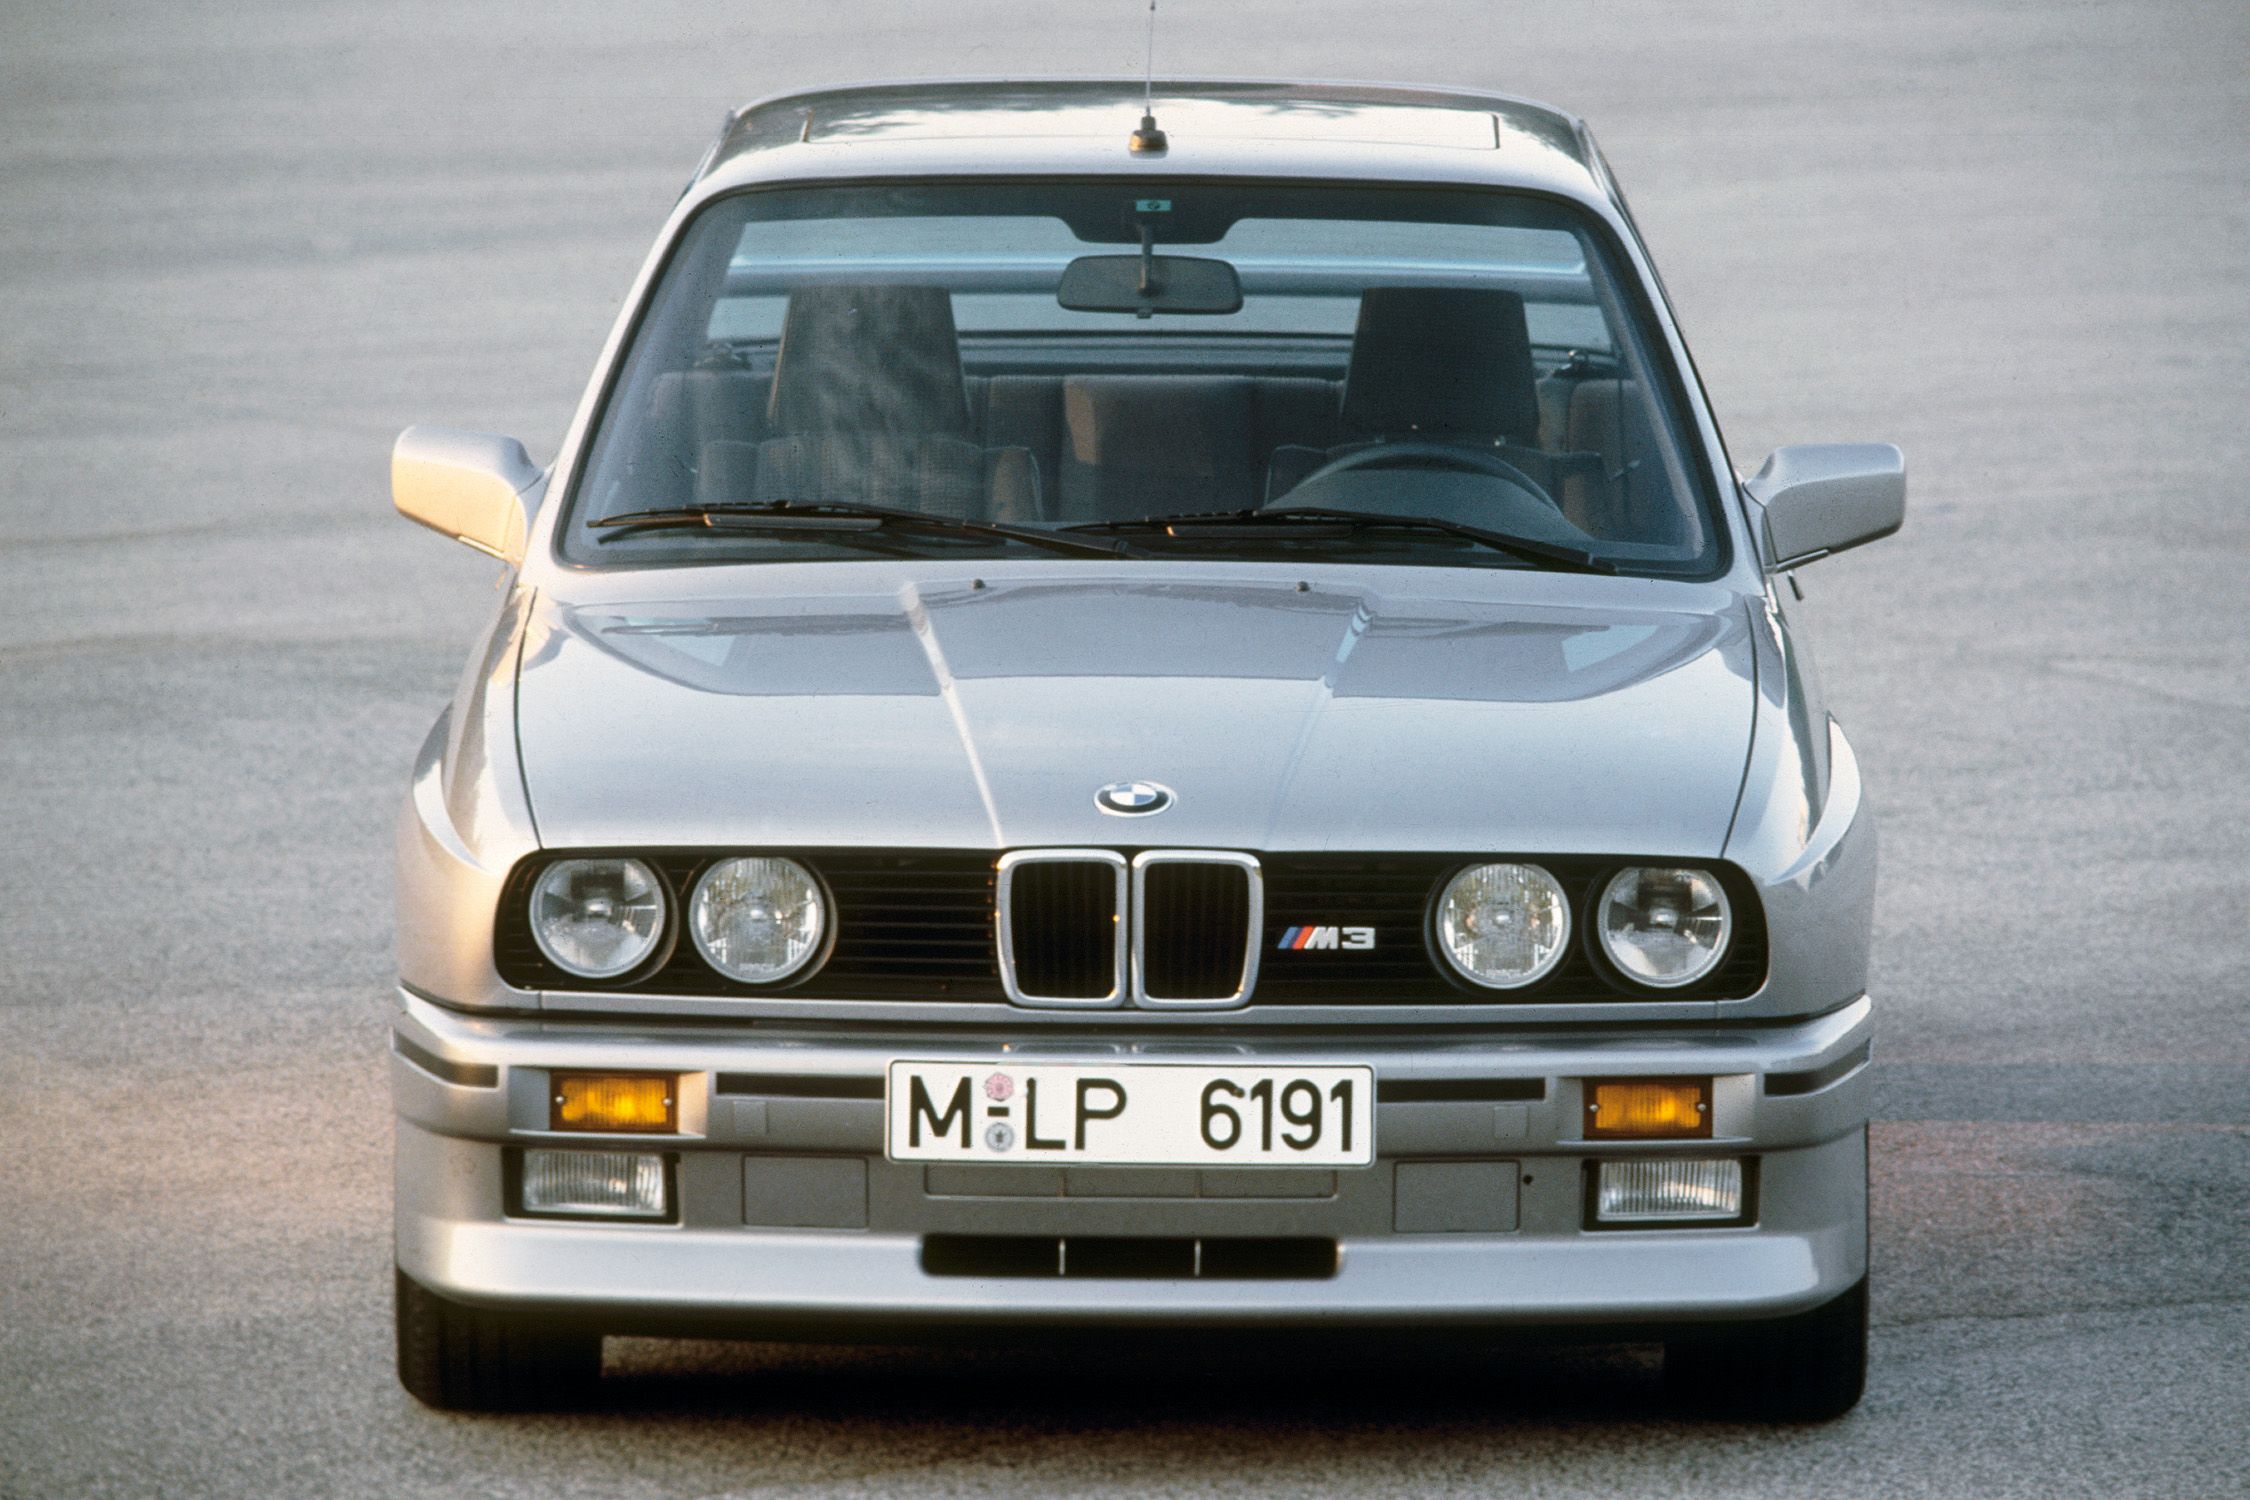 Here's Why The BMW E30 M3 Commands So Much Money Today